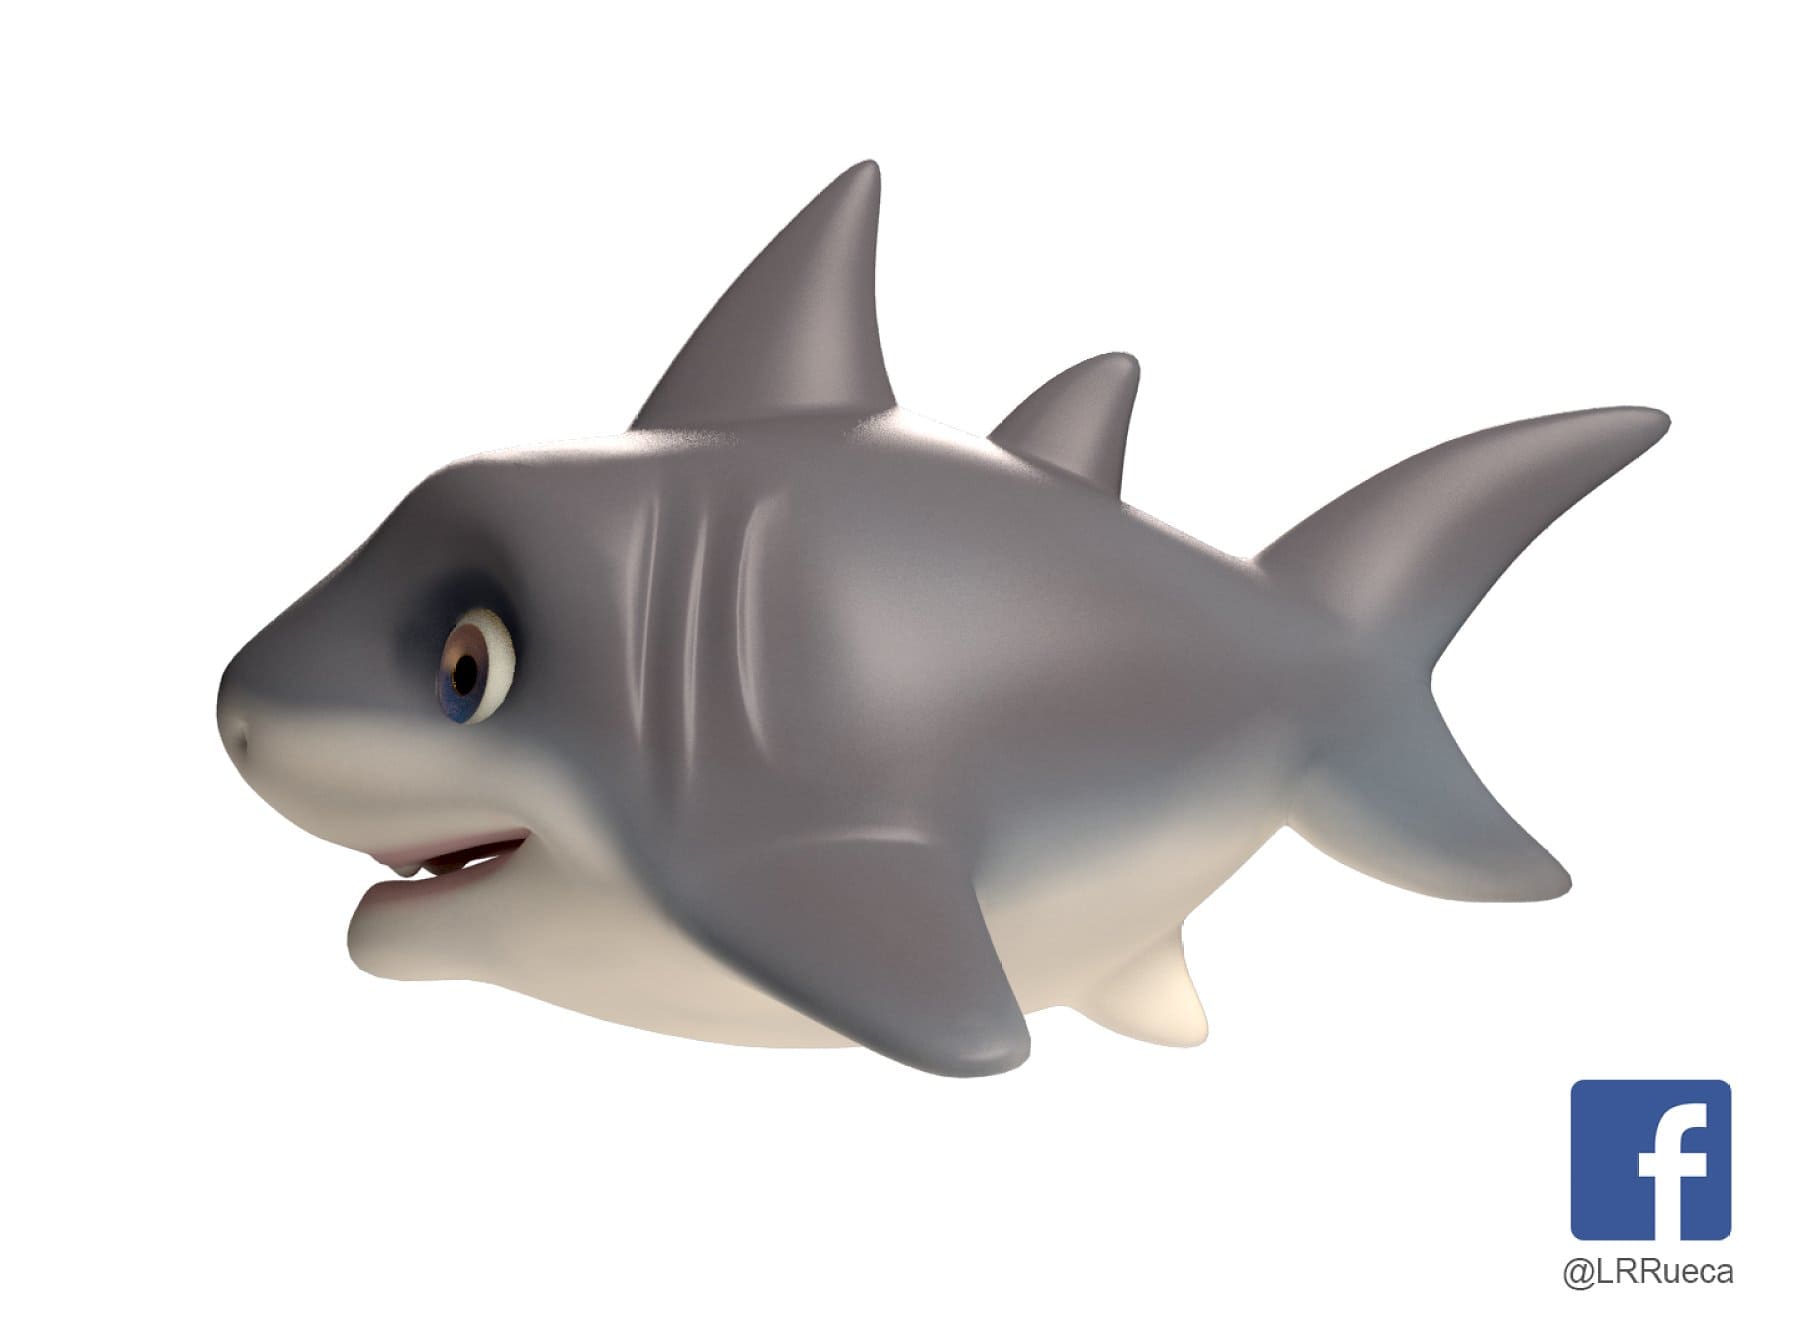 3D model of a shark's face in gray color. Color model of cartoon shark side view.